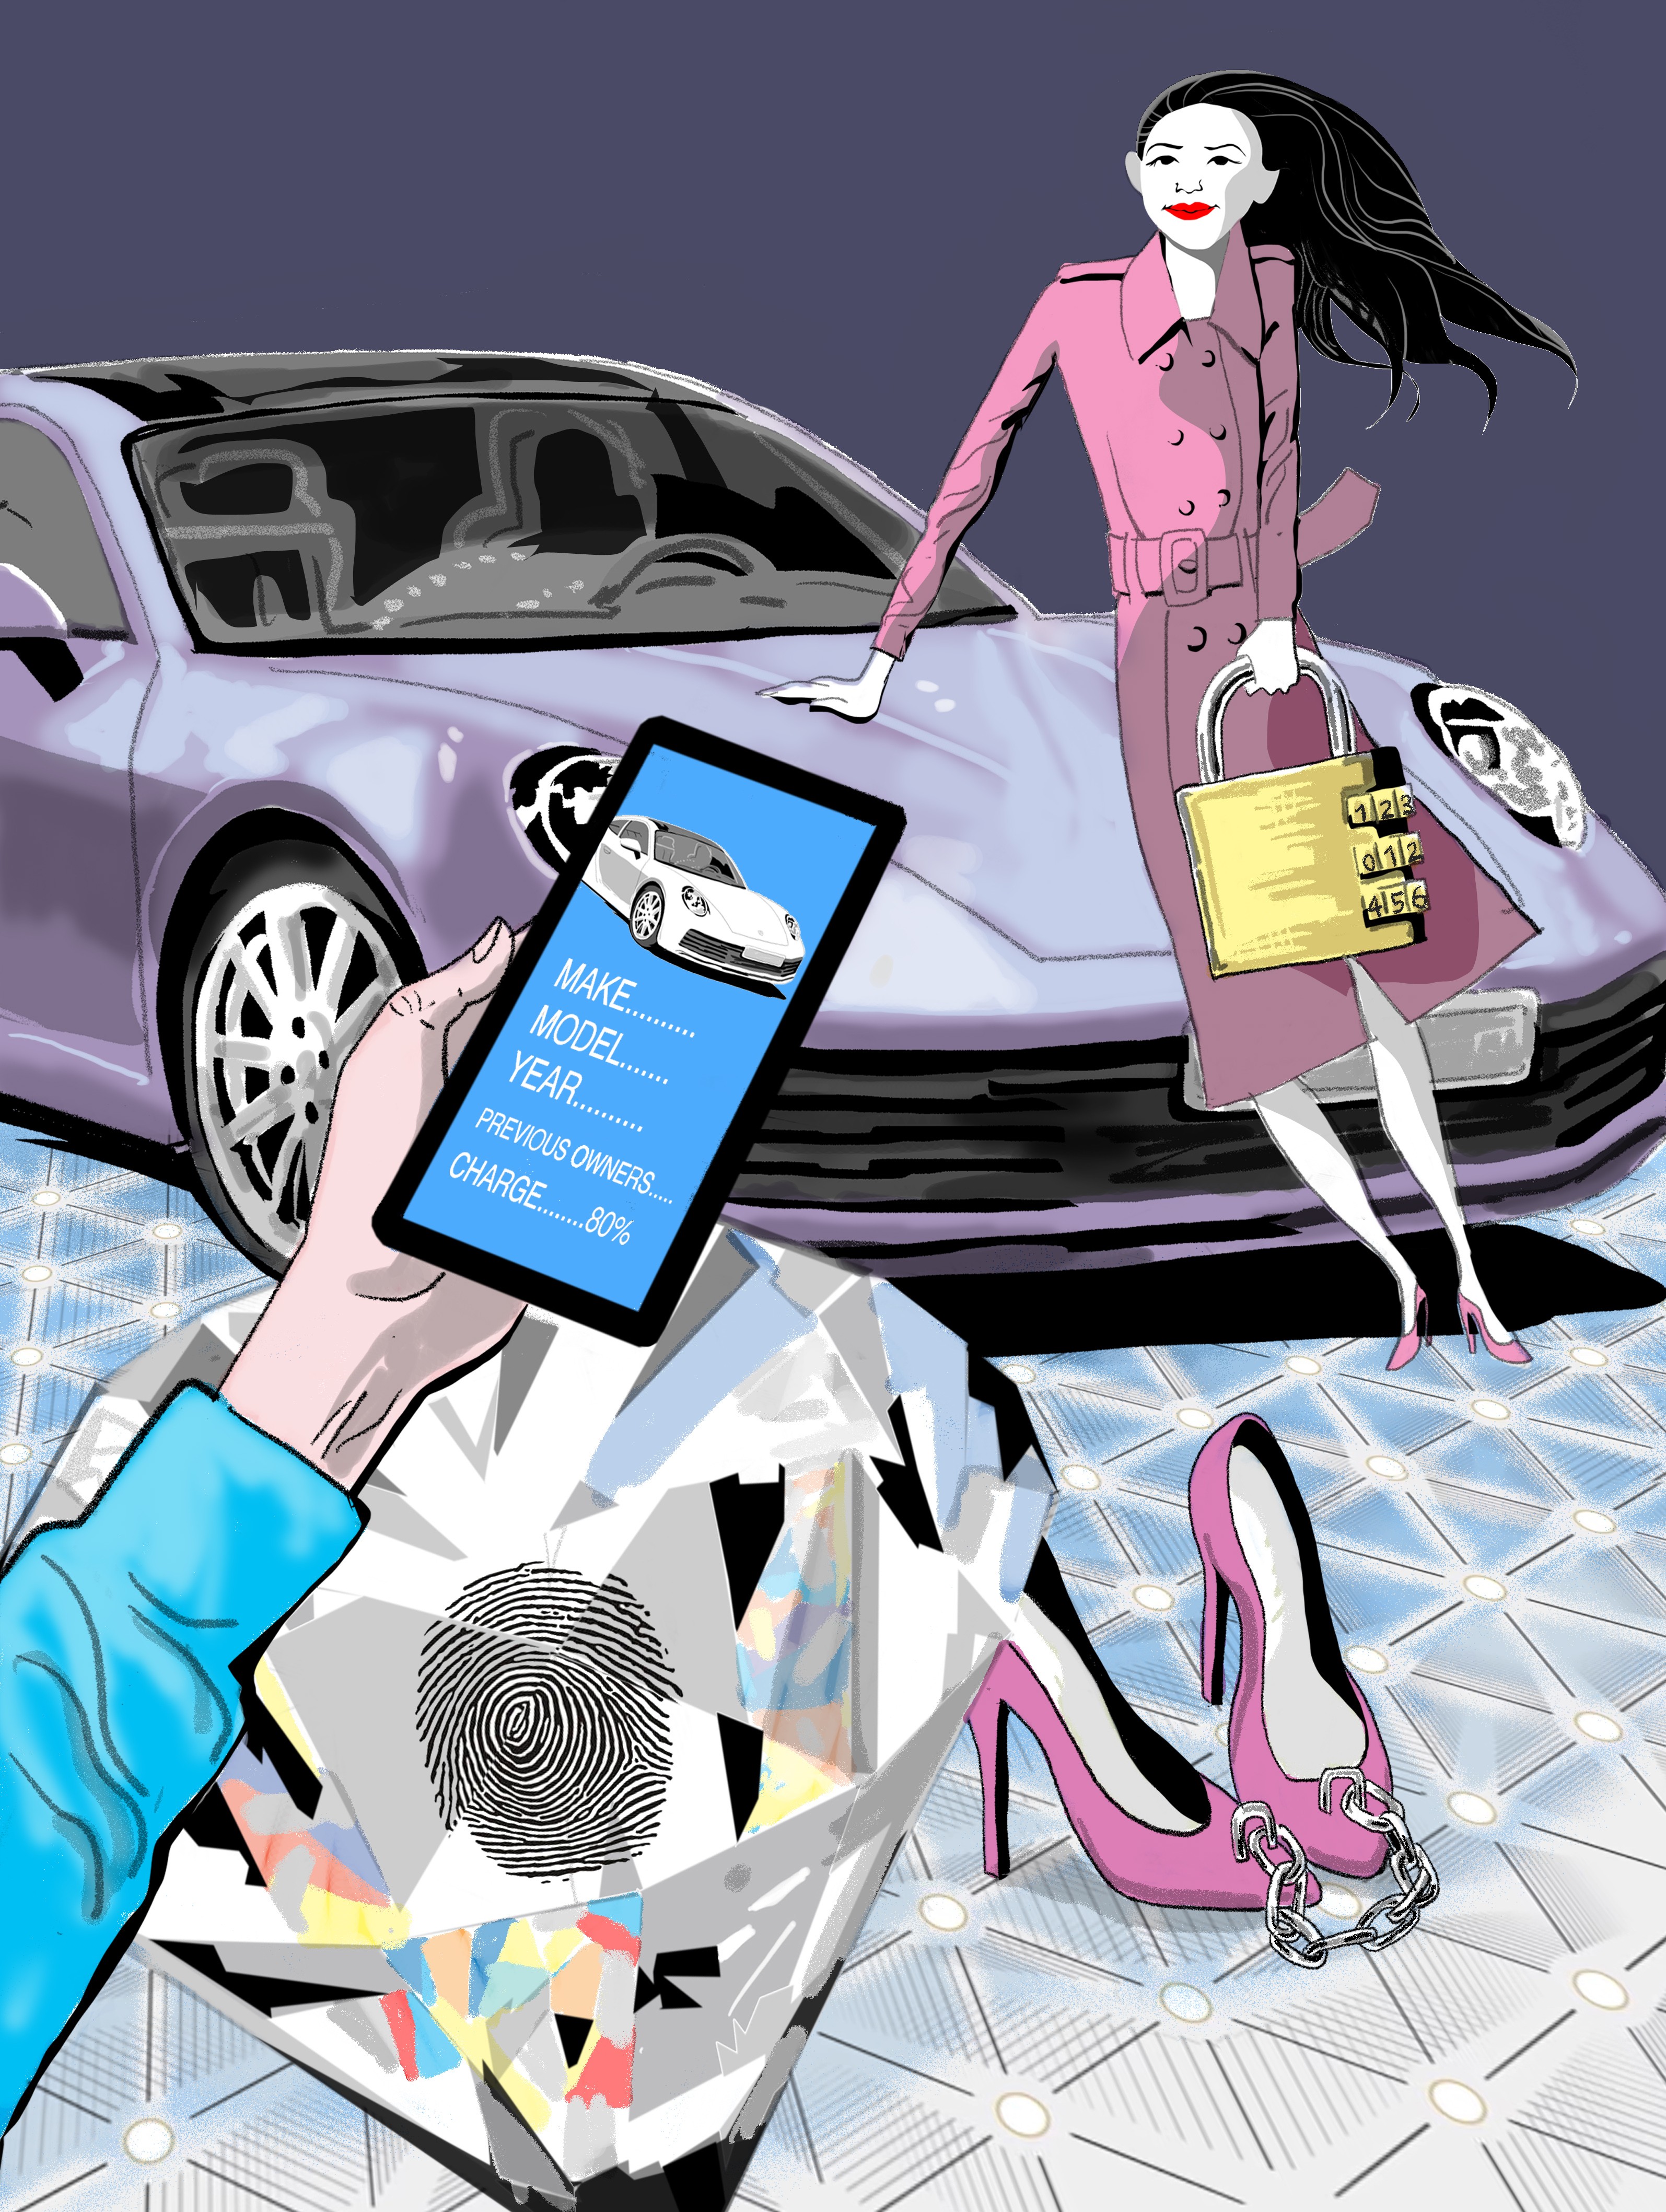 With blockchain technology, consumers can check the authenticity of luxury goods and their origins. Illustration: Craig Stephens